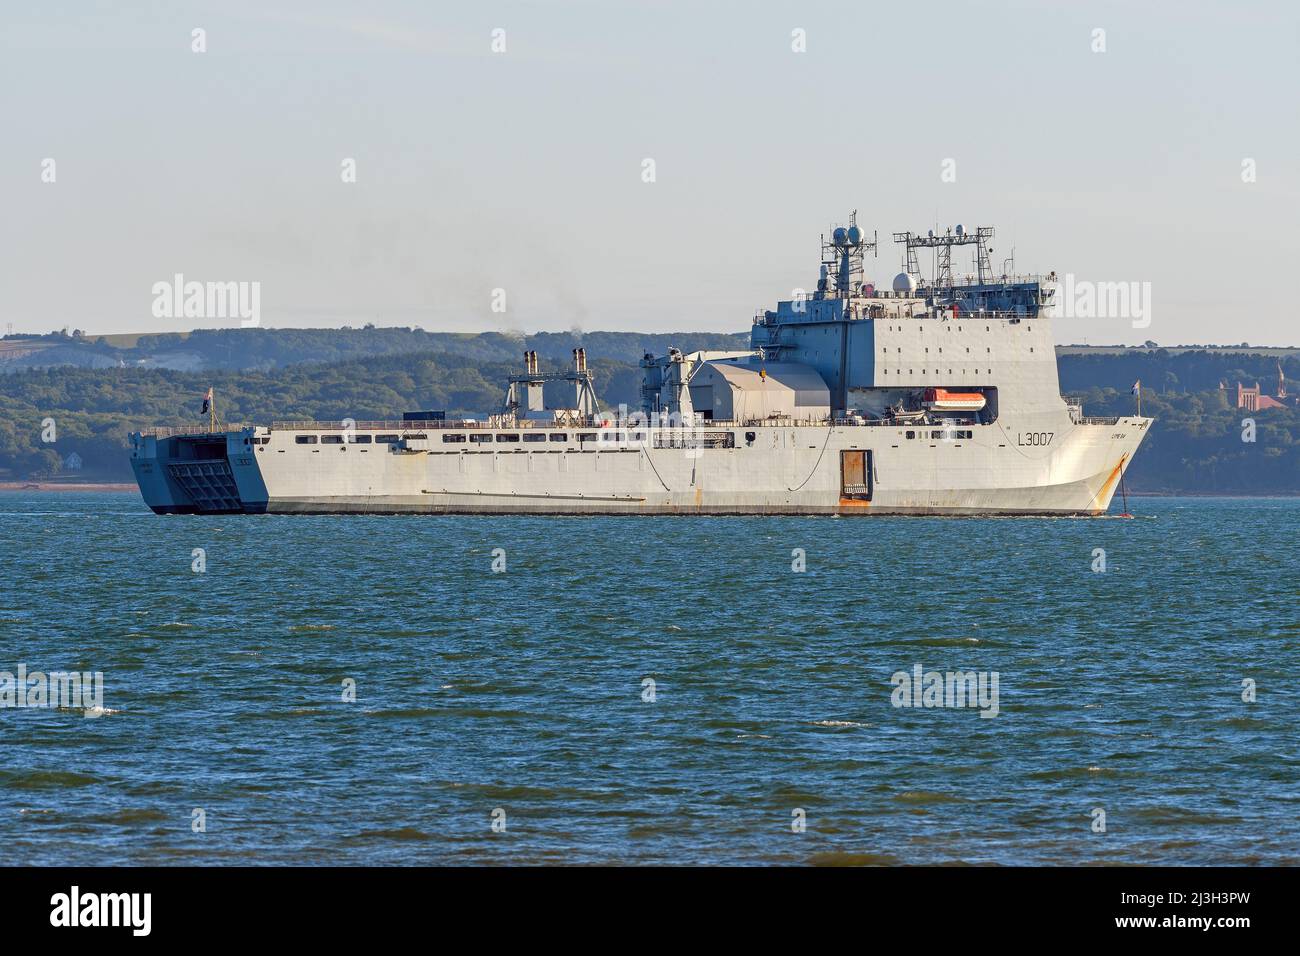 The British Bay class auxiliary landing ship RFA Lyme Bay (L3007) is operated by the Royal Fleet Auxiliary - August 2020. Stock Photo